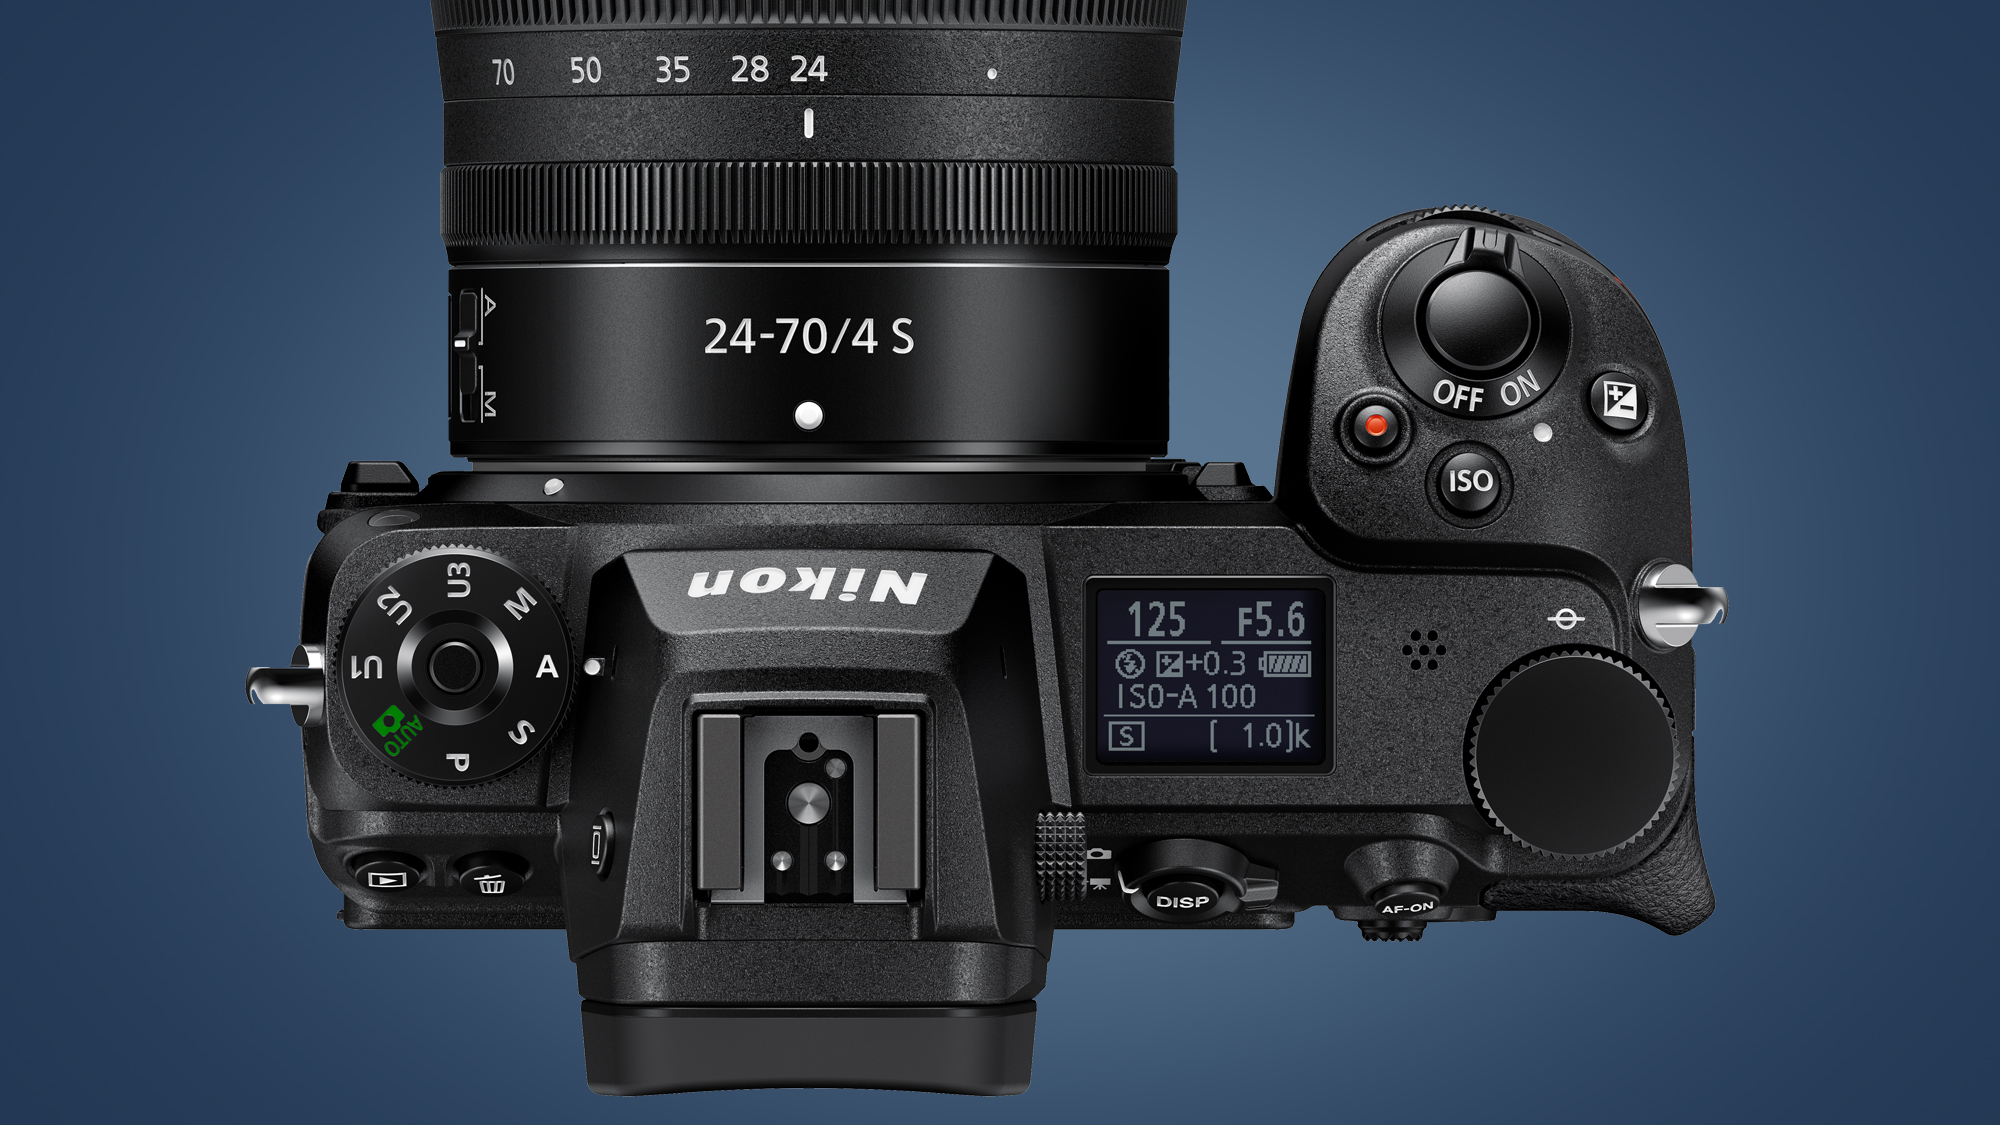 Nikon Z6 II and Z7 II release date, price and all the details on its